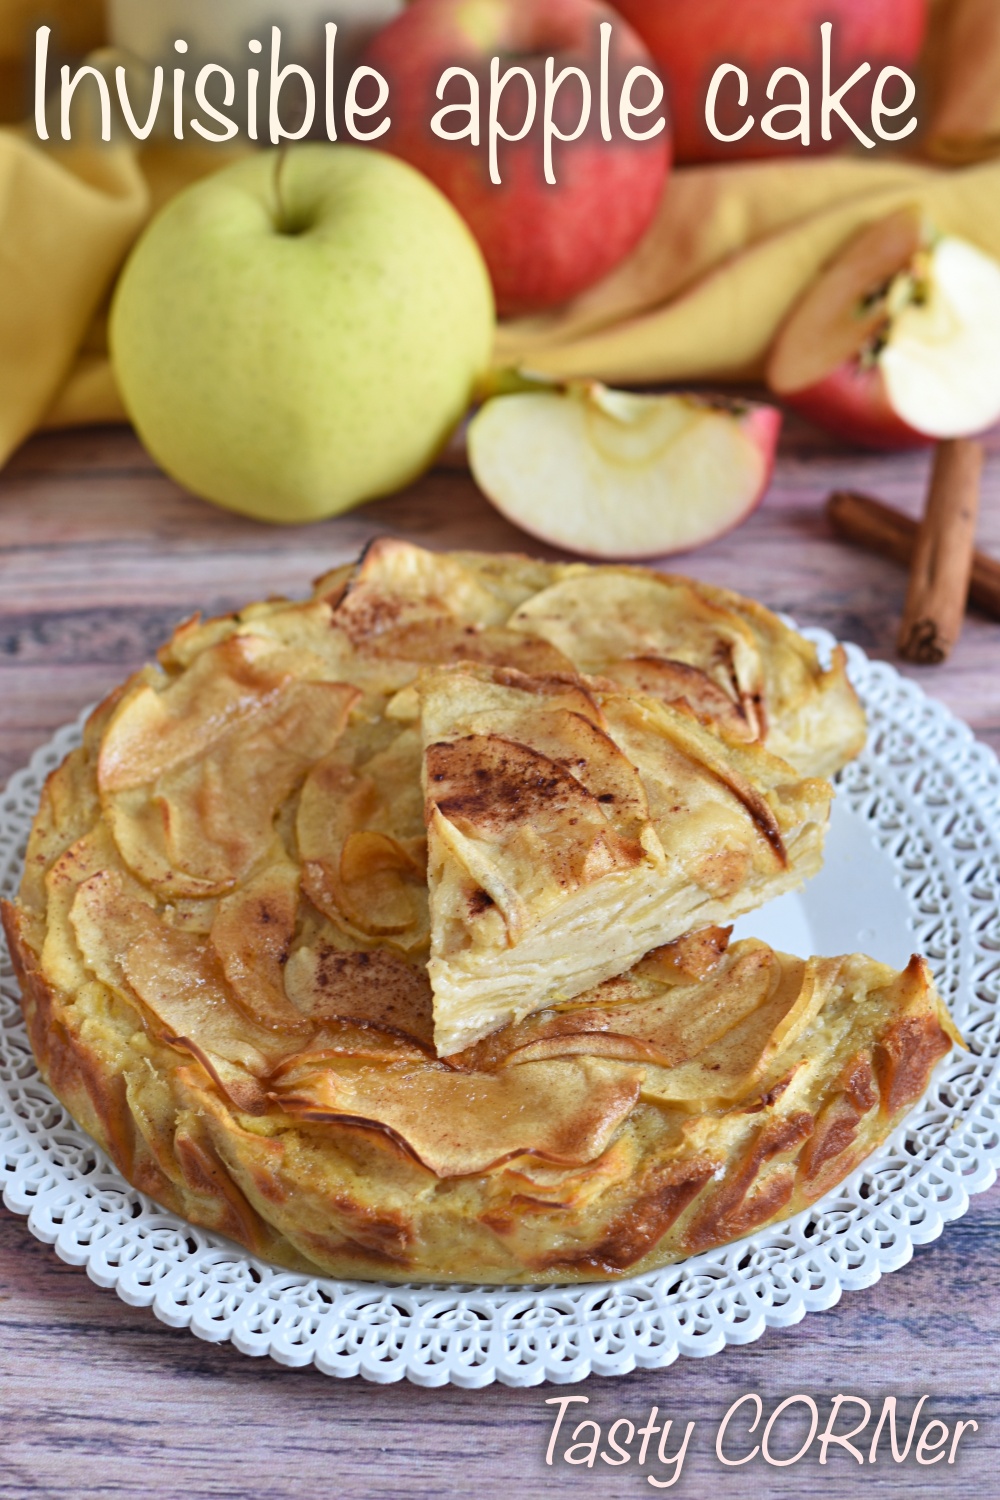 en_v_ invisible apple cake glutenfree low sugar easy recipe with a lot of apples by tastycorner